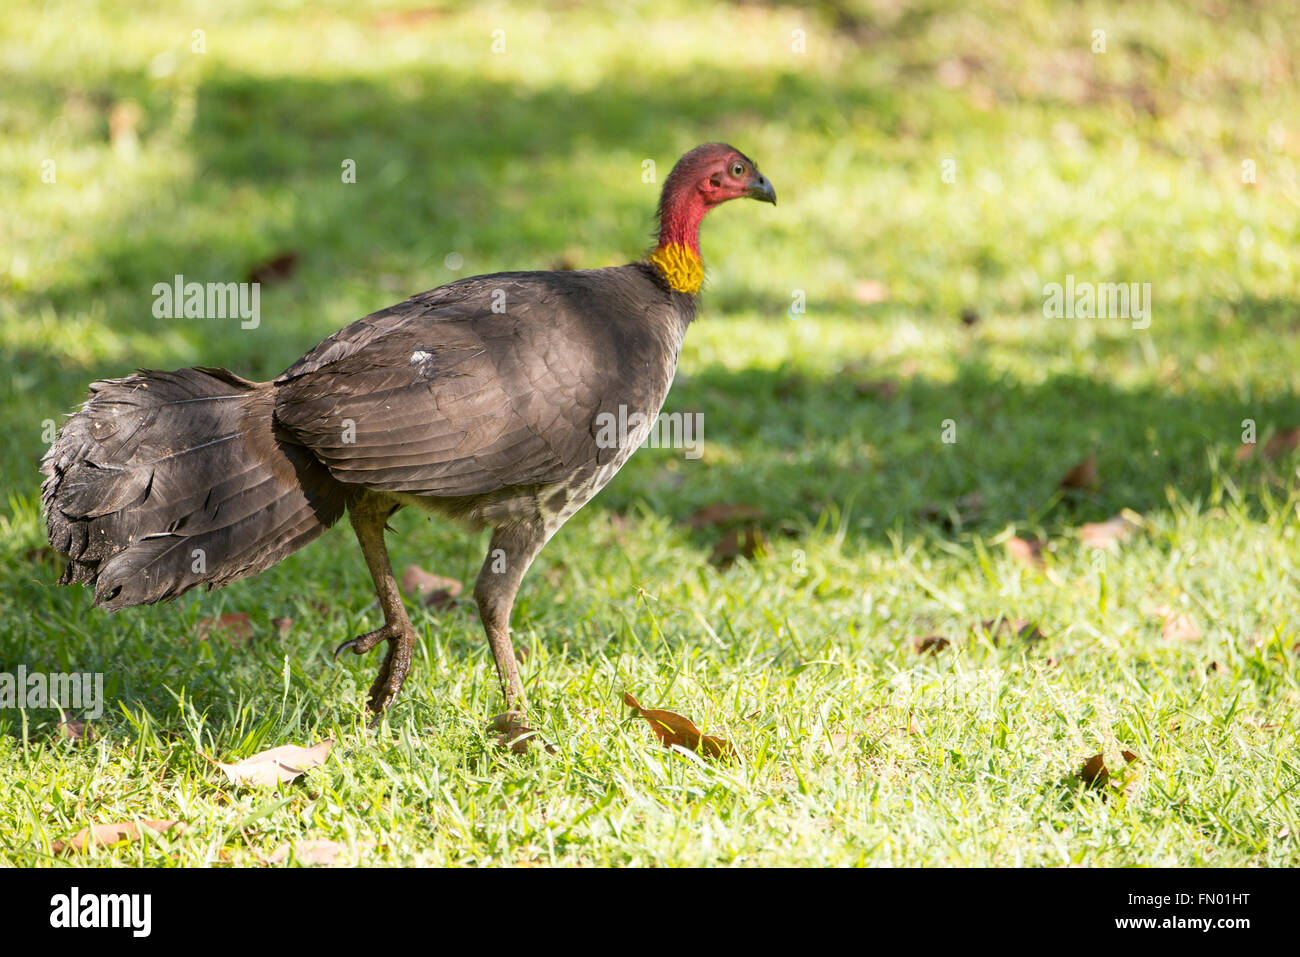 An Australian Brush Turkey, also known as a Scrub turkey, Bush turkey, are a common sight in Queensland, Australia.  It is regarded as a pest for Stock Photo